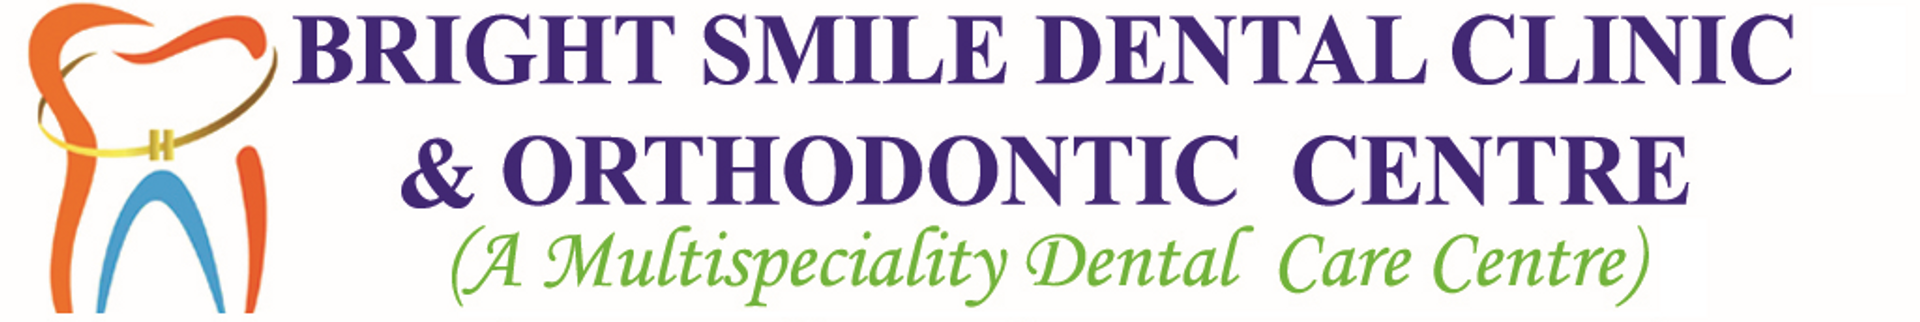 Bright Smile Dental Clinic Orthodontic and Implant Center|Diagnostic centre|Medical Services